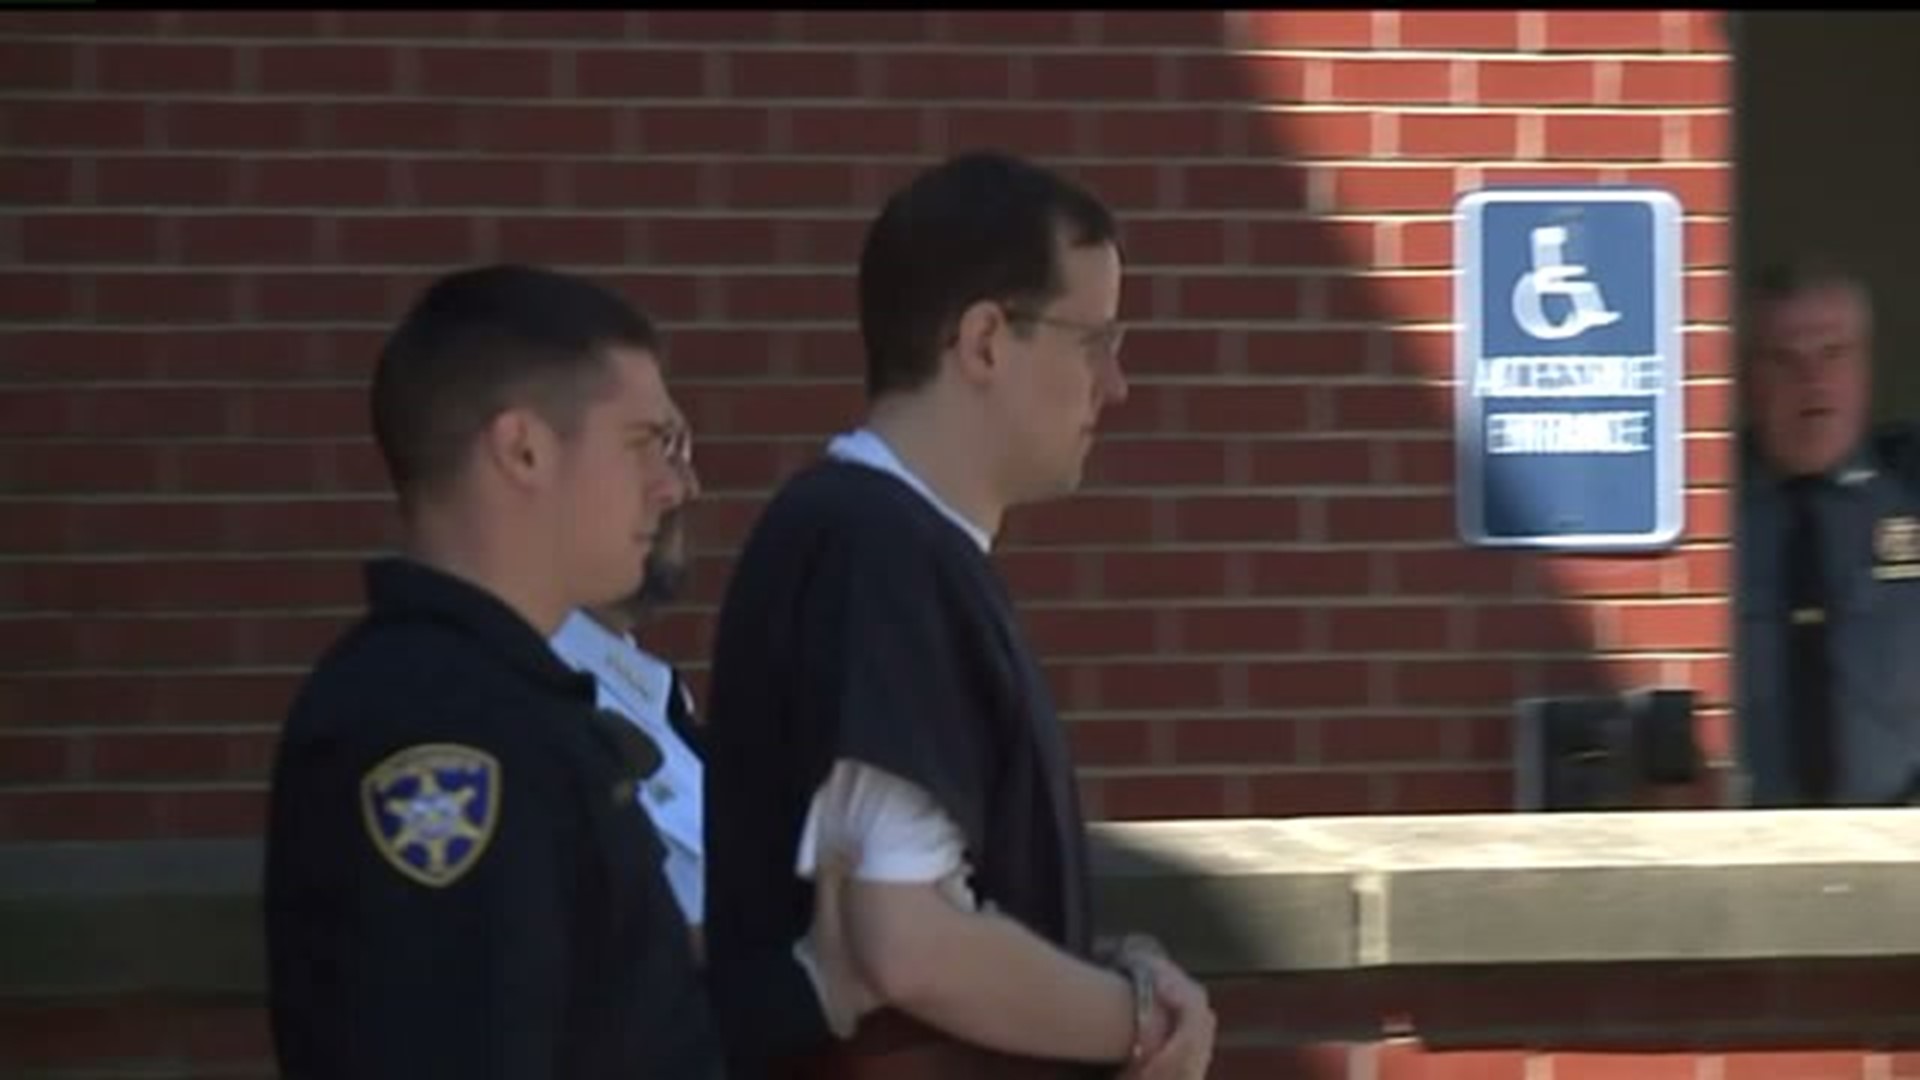 Jury selection is set to start today for accused cop killer Eric Frein`s trial